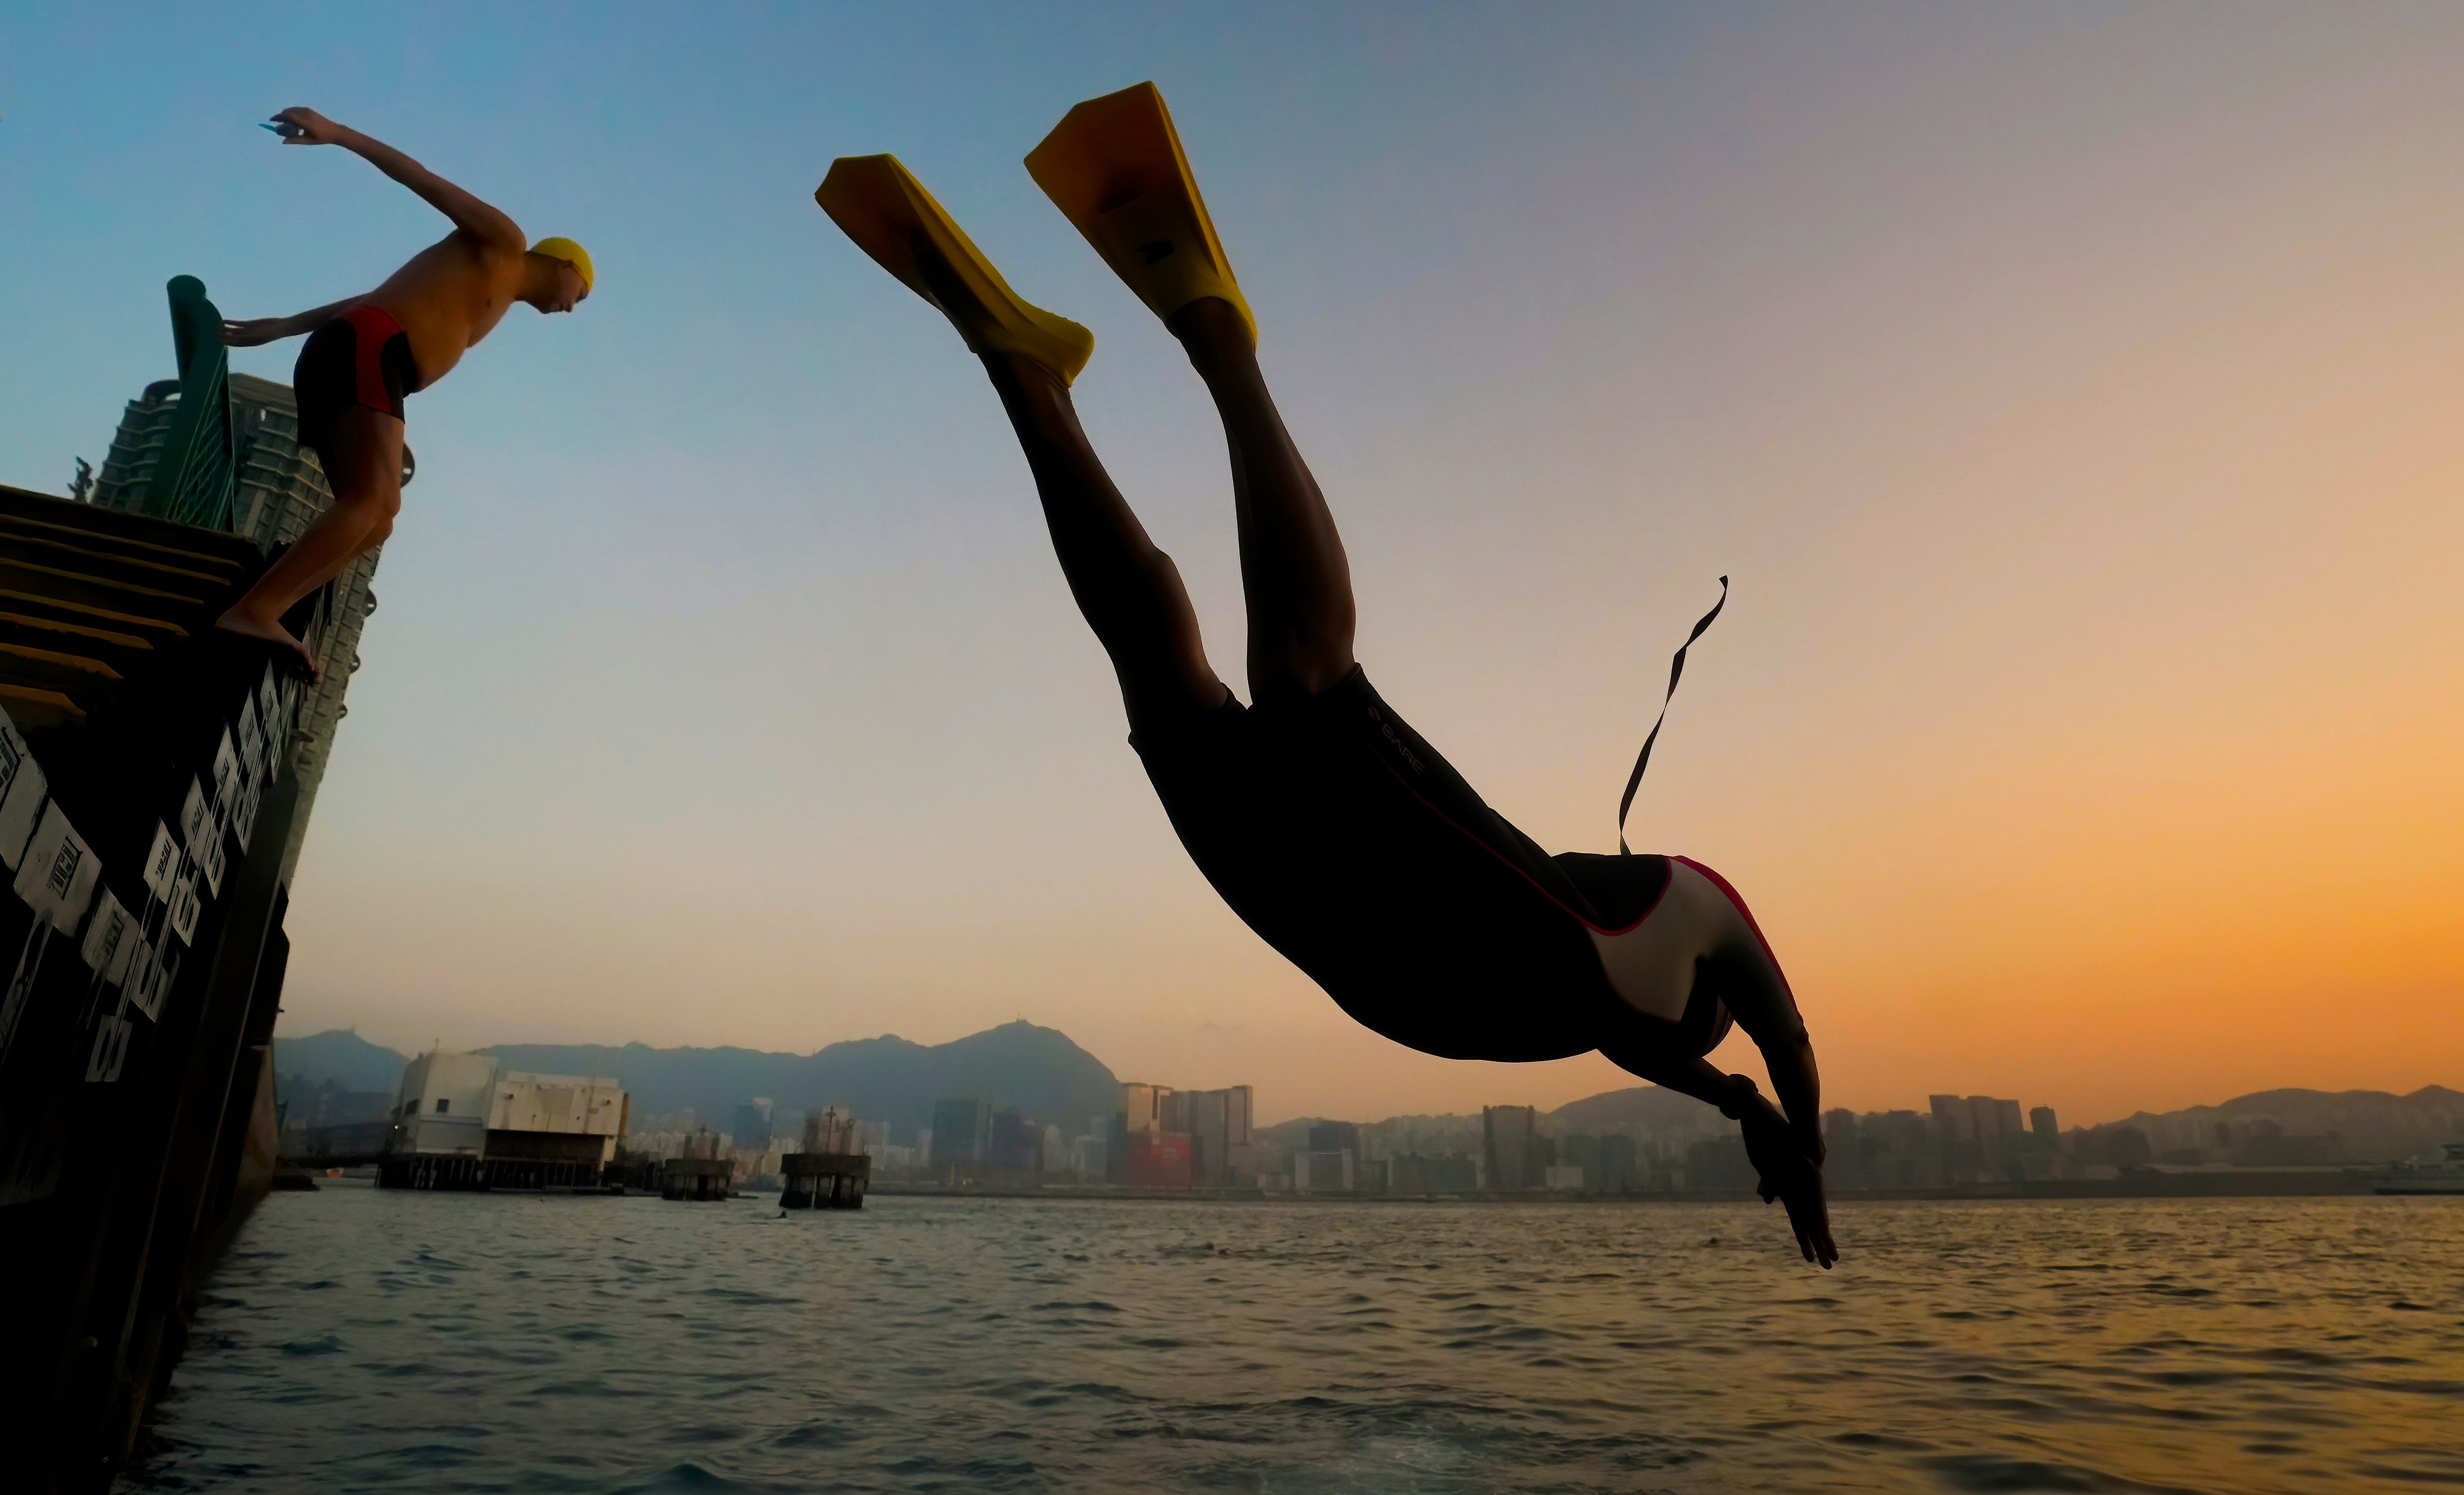 Swimmers take to the water near Tai Wan Shan Park, Hung Hom, on December 4, 2020. Photo: Felix Wong